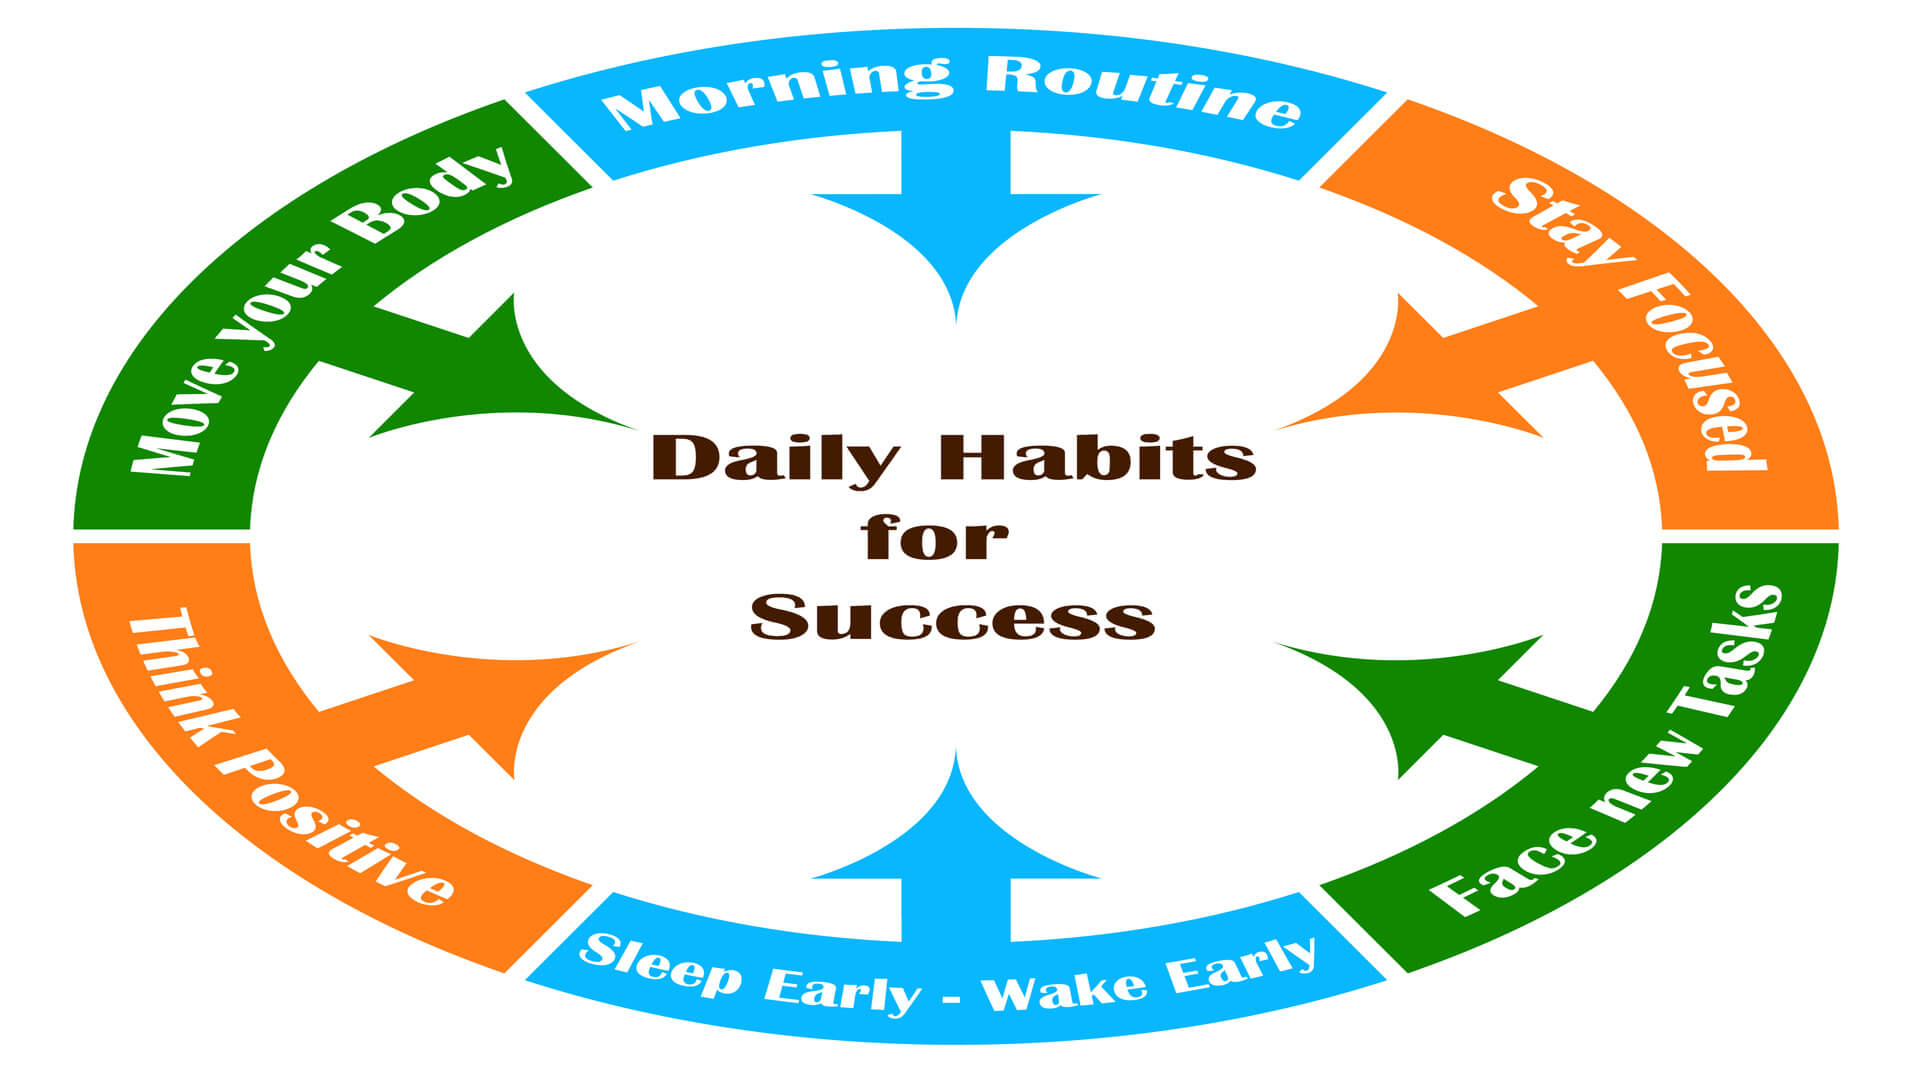 5 Daily Habits You Should Follow to Become Successful in 2021